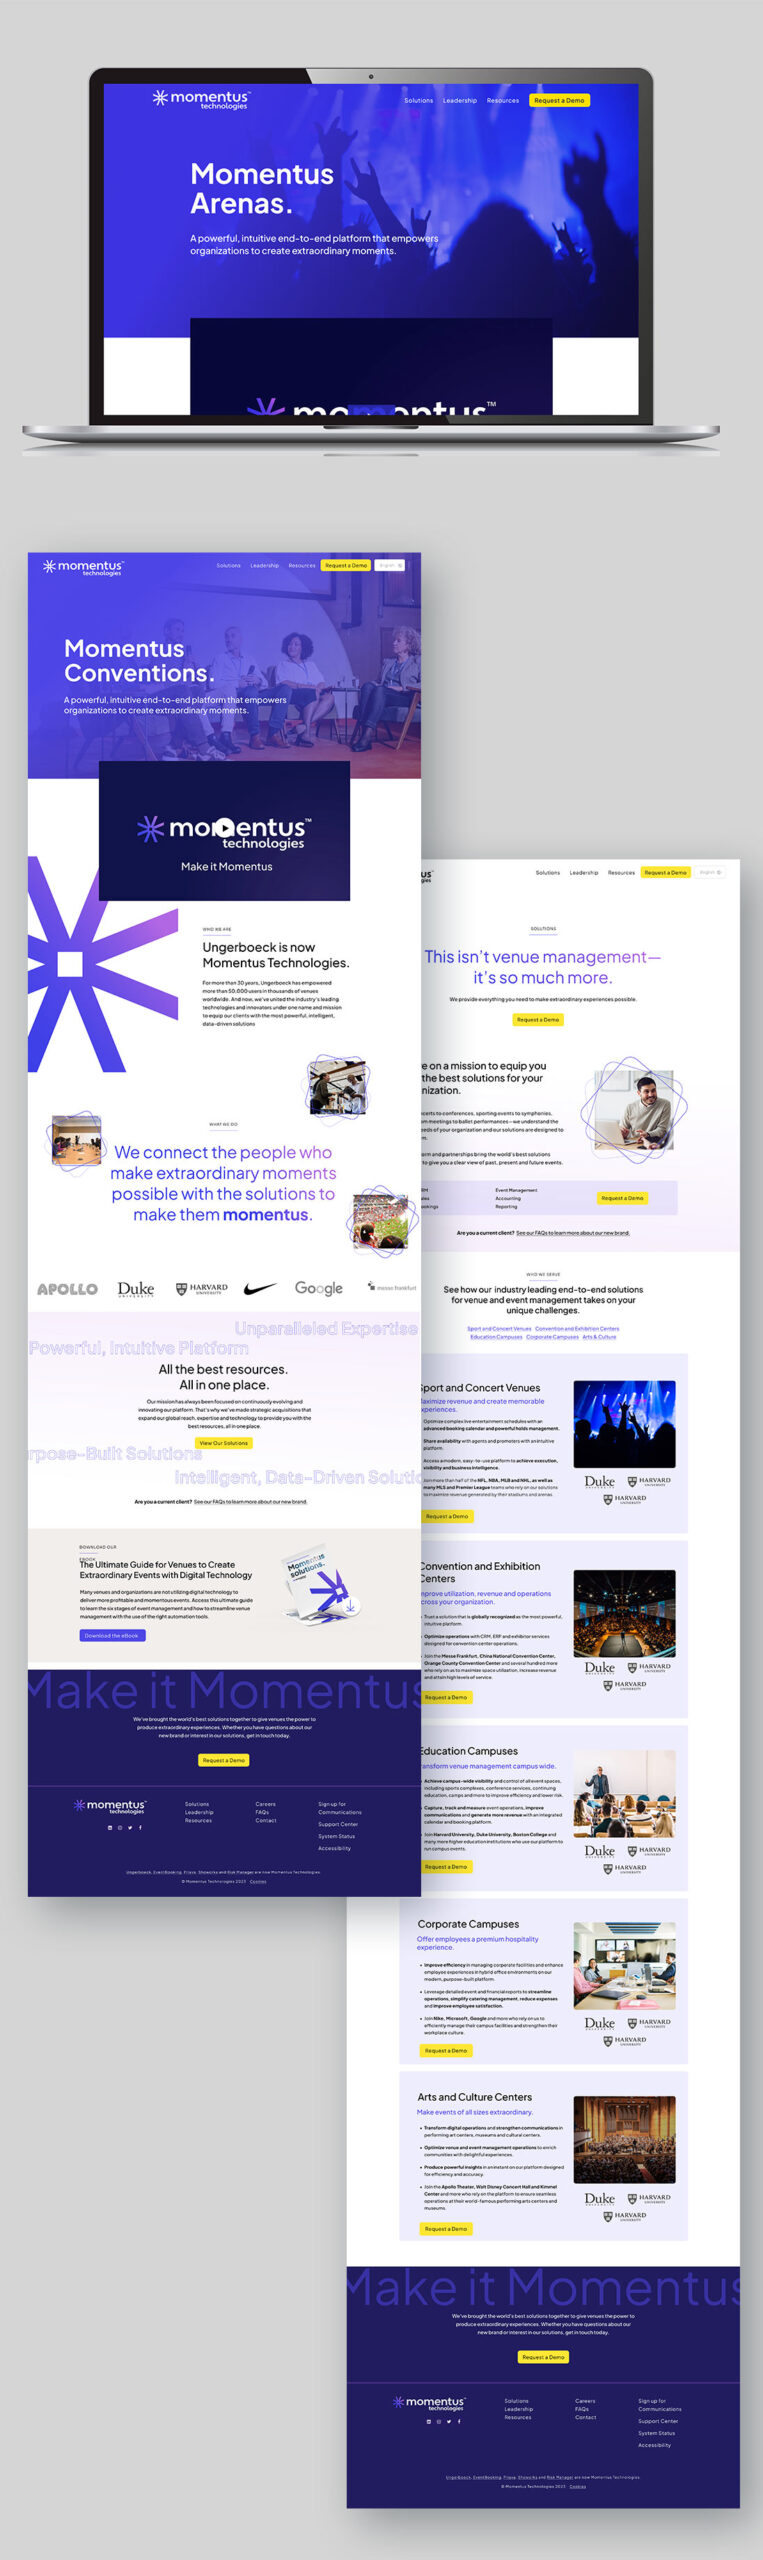 The design of the Momentus website design featuring the new name and branding.